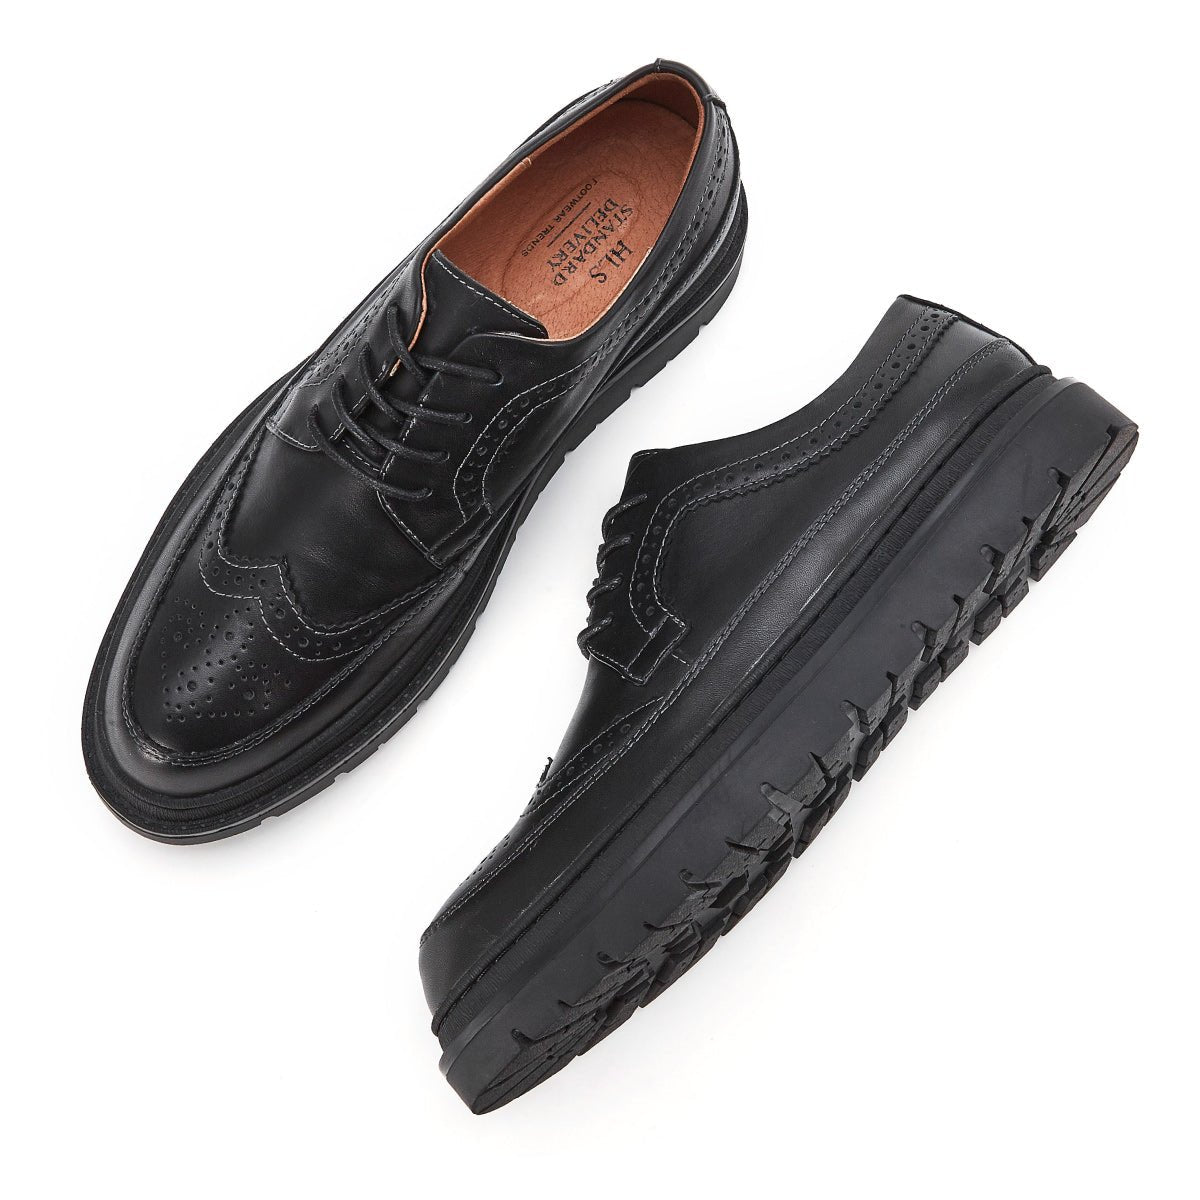 Full Scene Punch Hole Detailed Brogue Lace Up Black Leather Shoes - 0cm